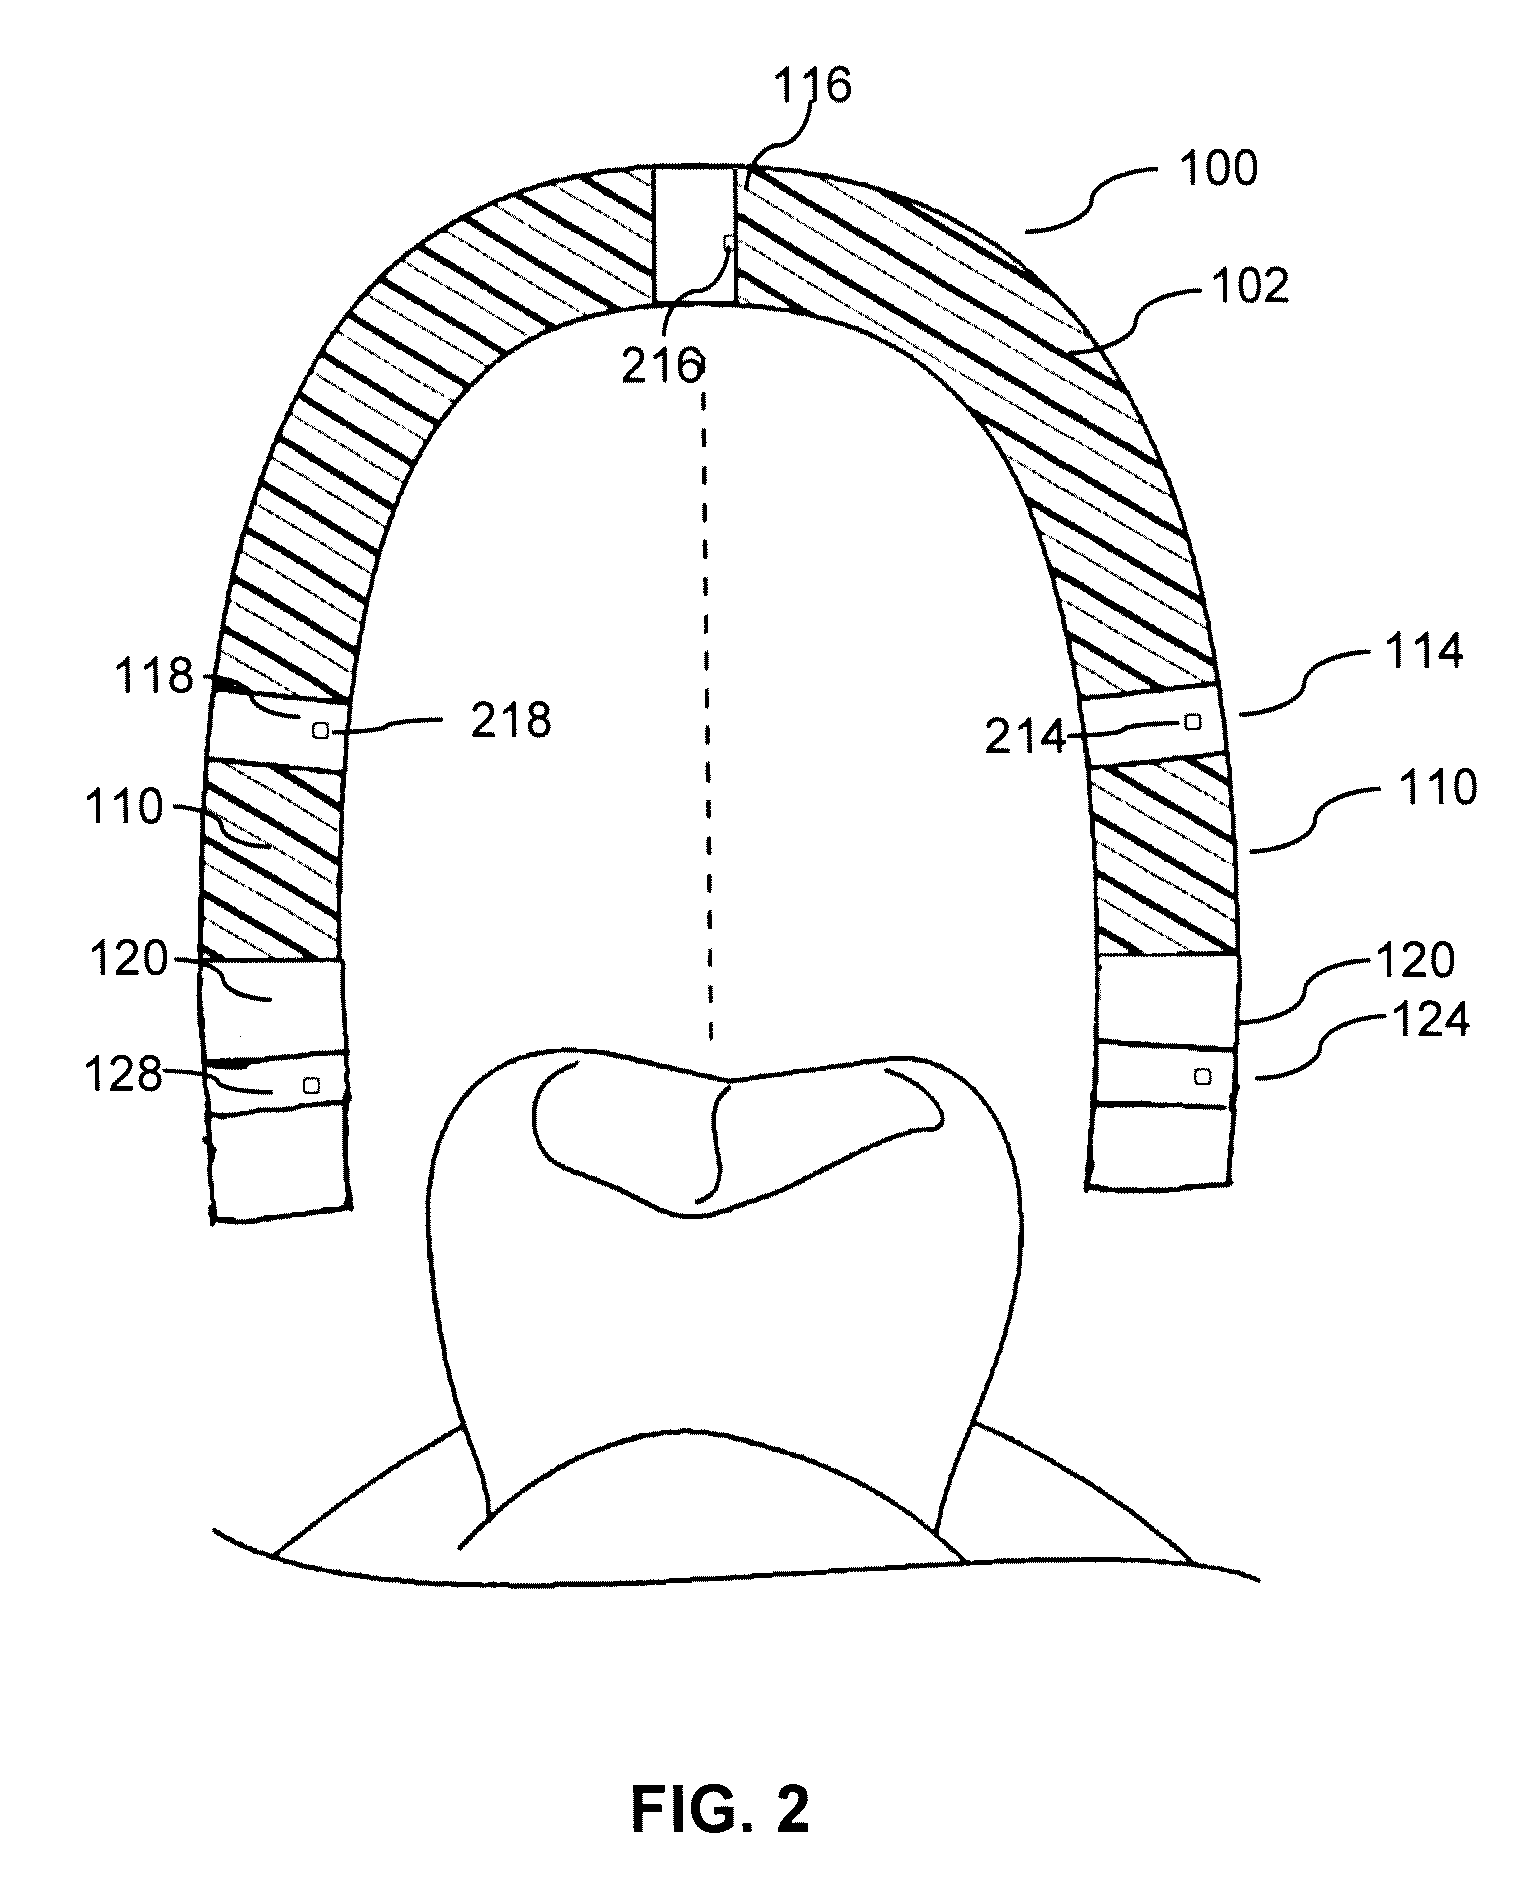 Apparatus and system for oxidative therapy in dentistry